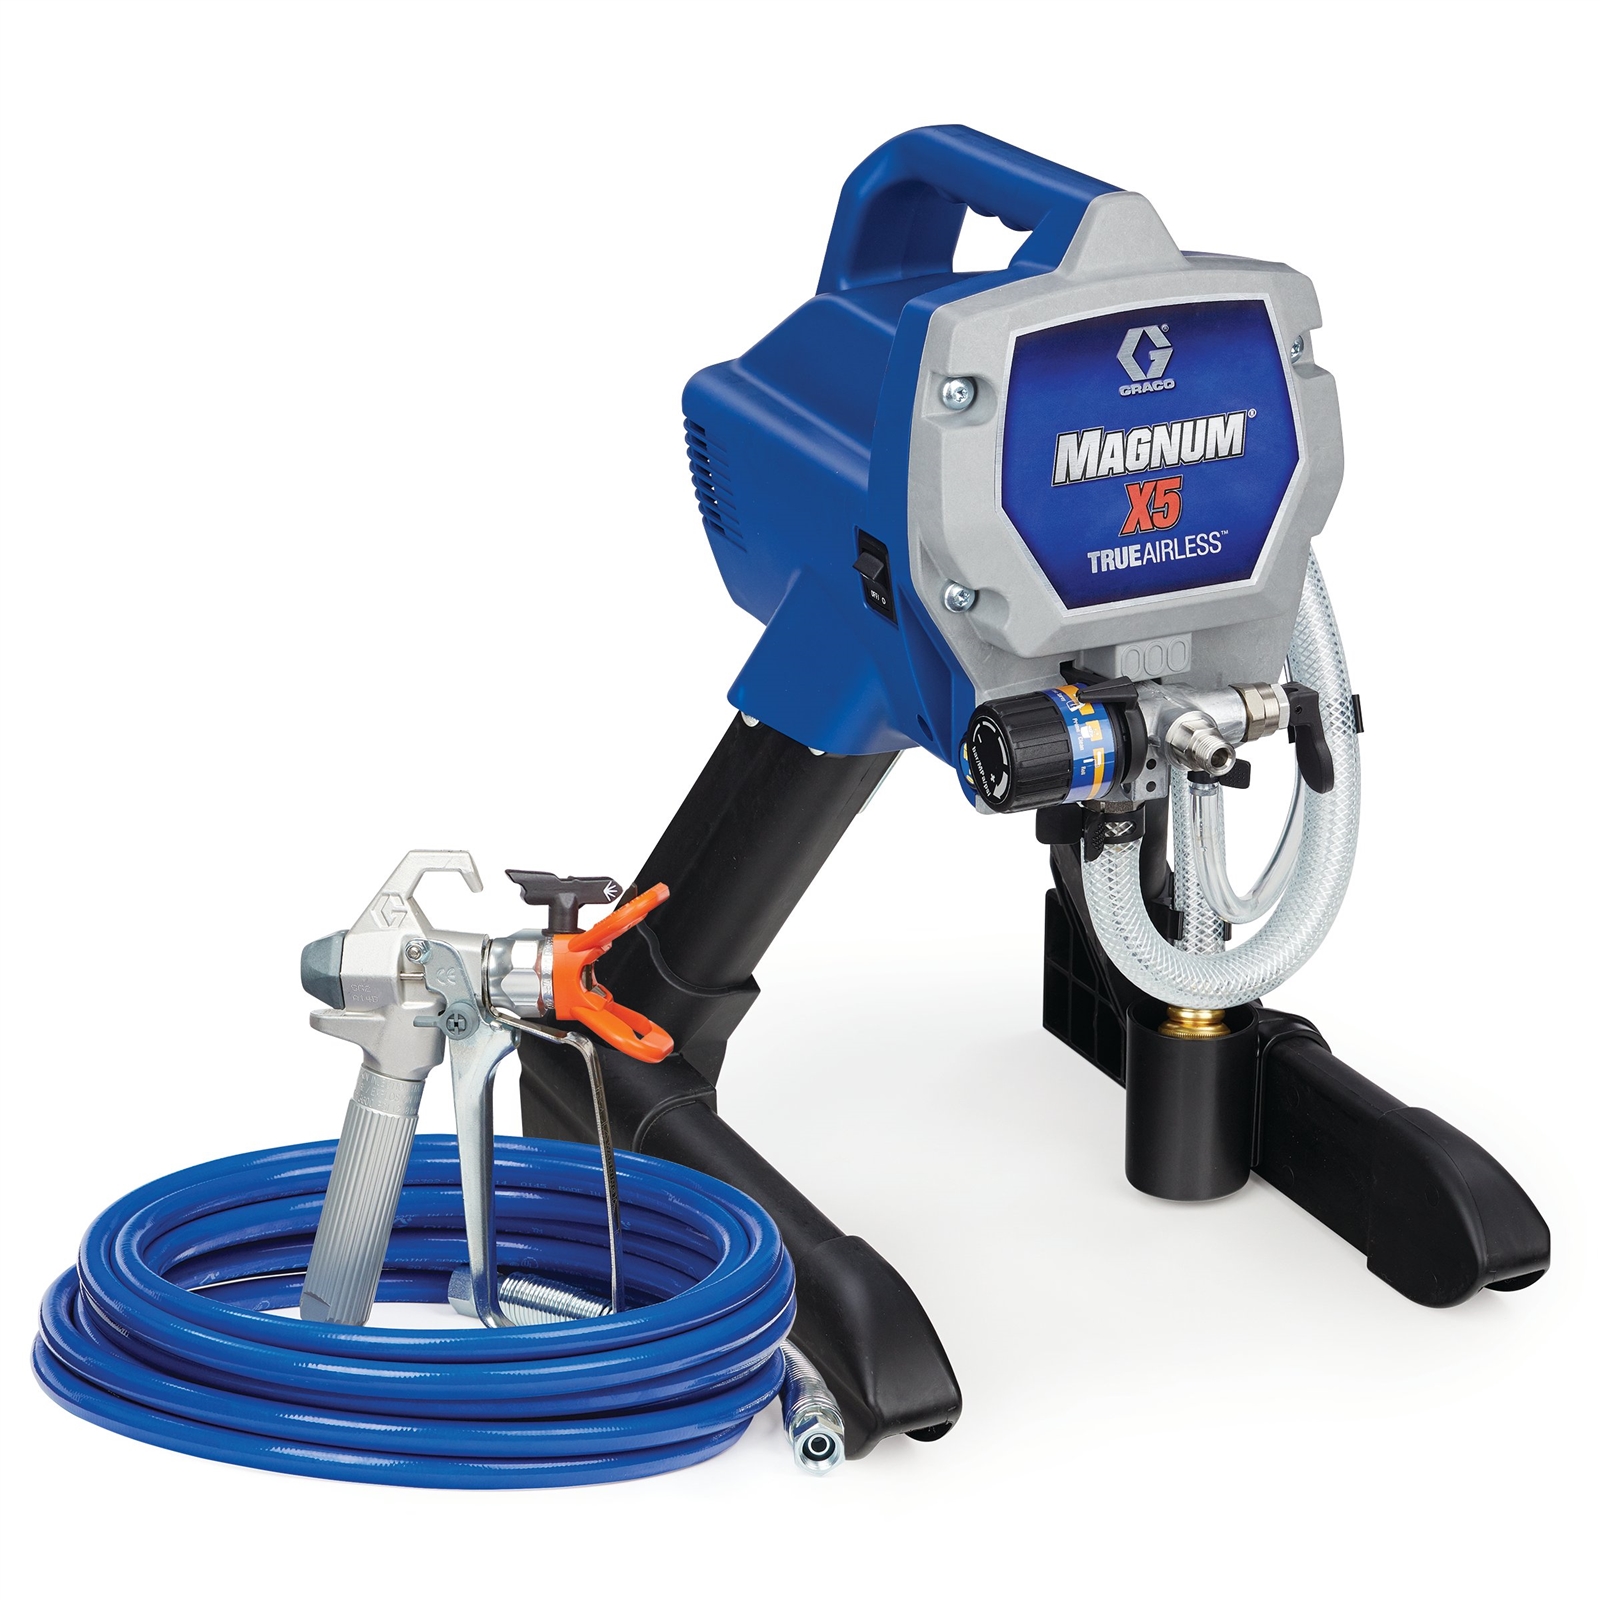 GRACO, 7/8 hp HP, 0.38 gpm Flow Rate, Airless Paint Sprayer - 48YD37